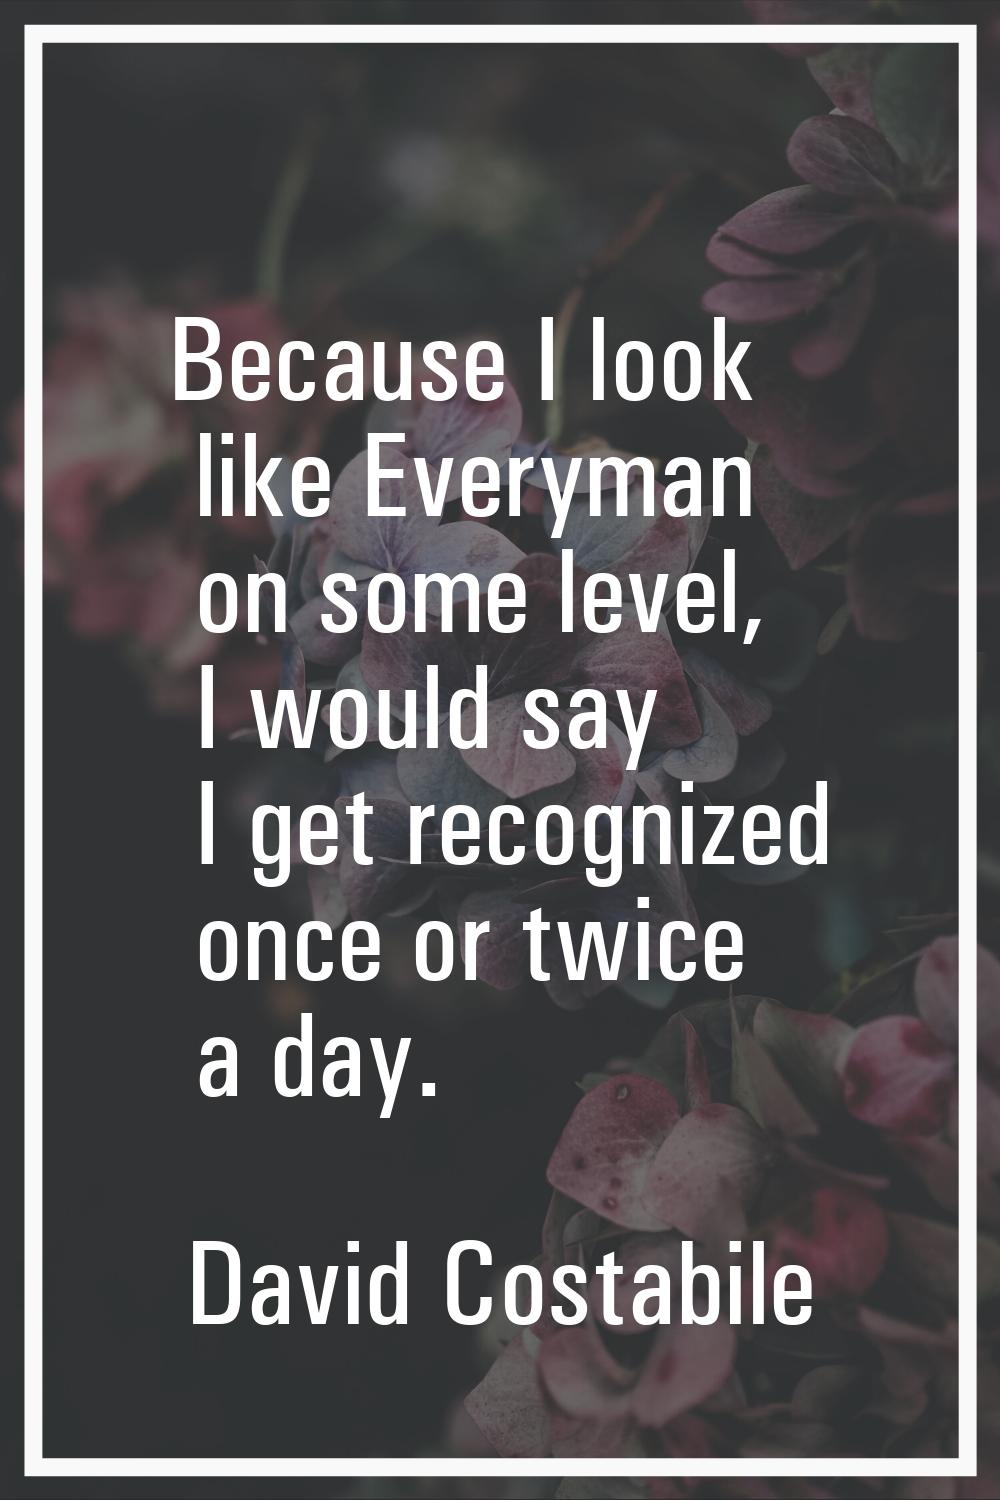 Because I look like Everyman on some level, I would say I get recognized once or twice a day.